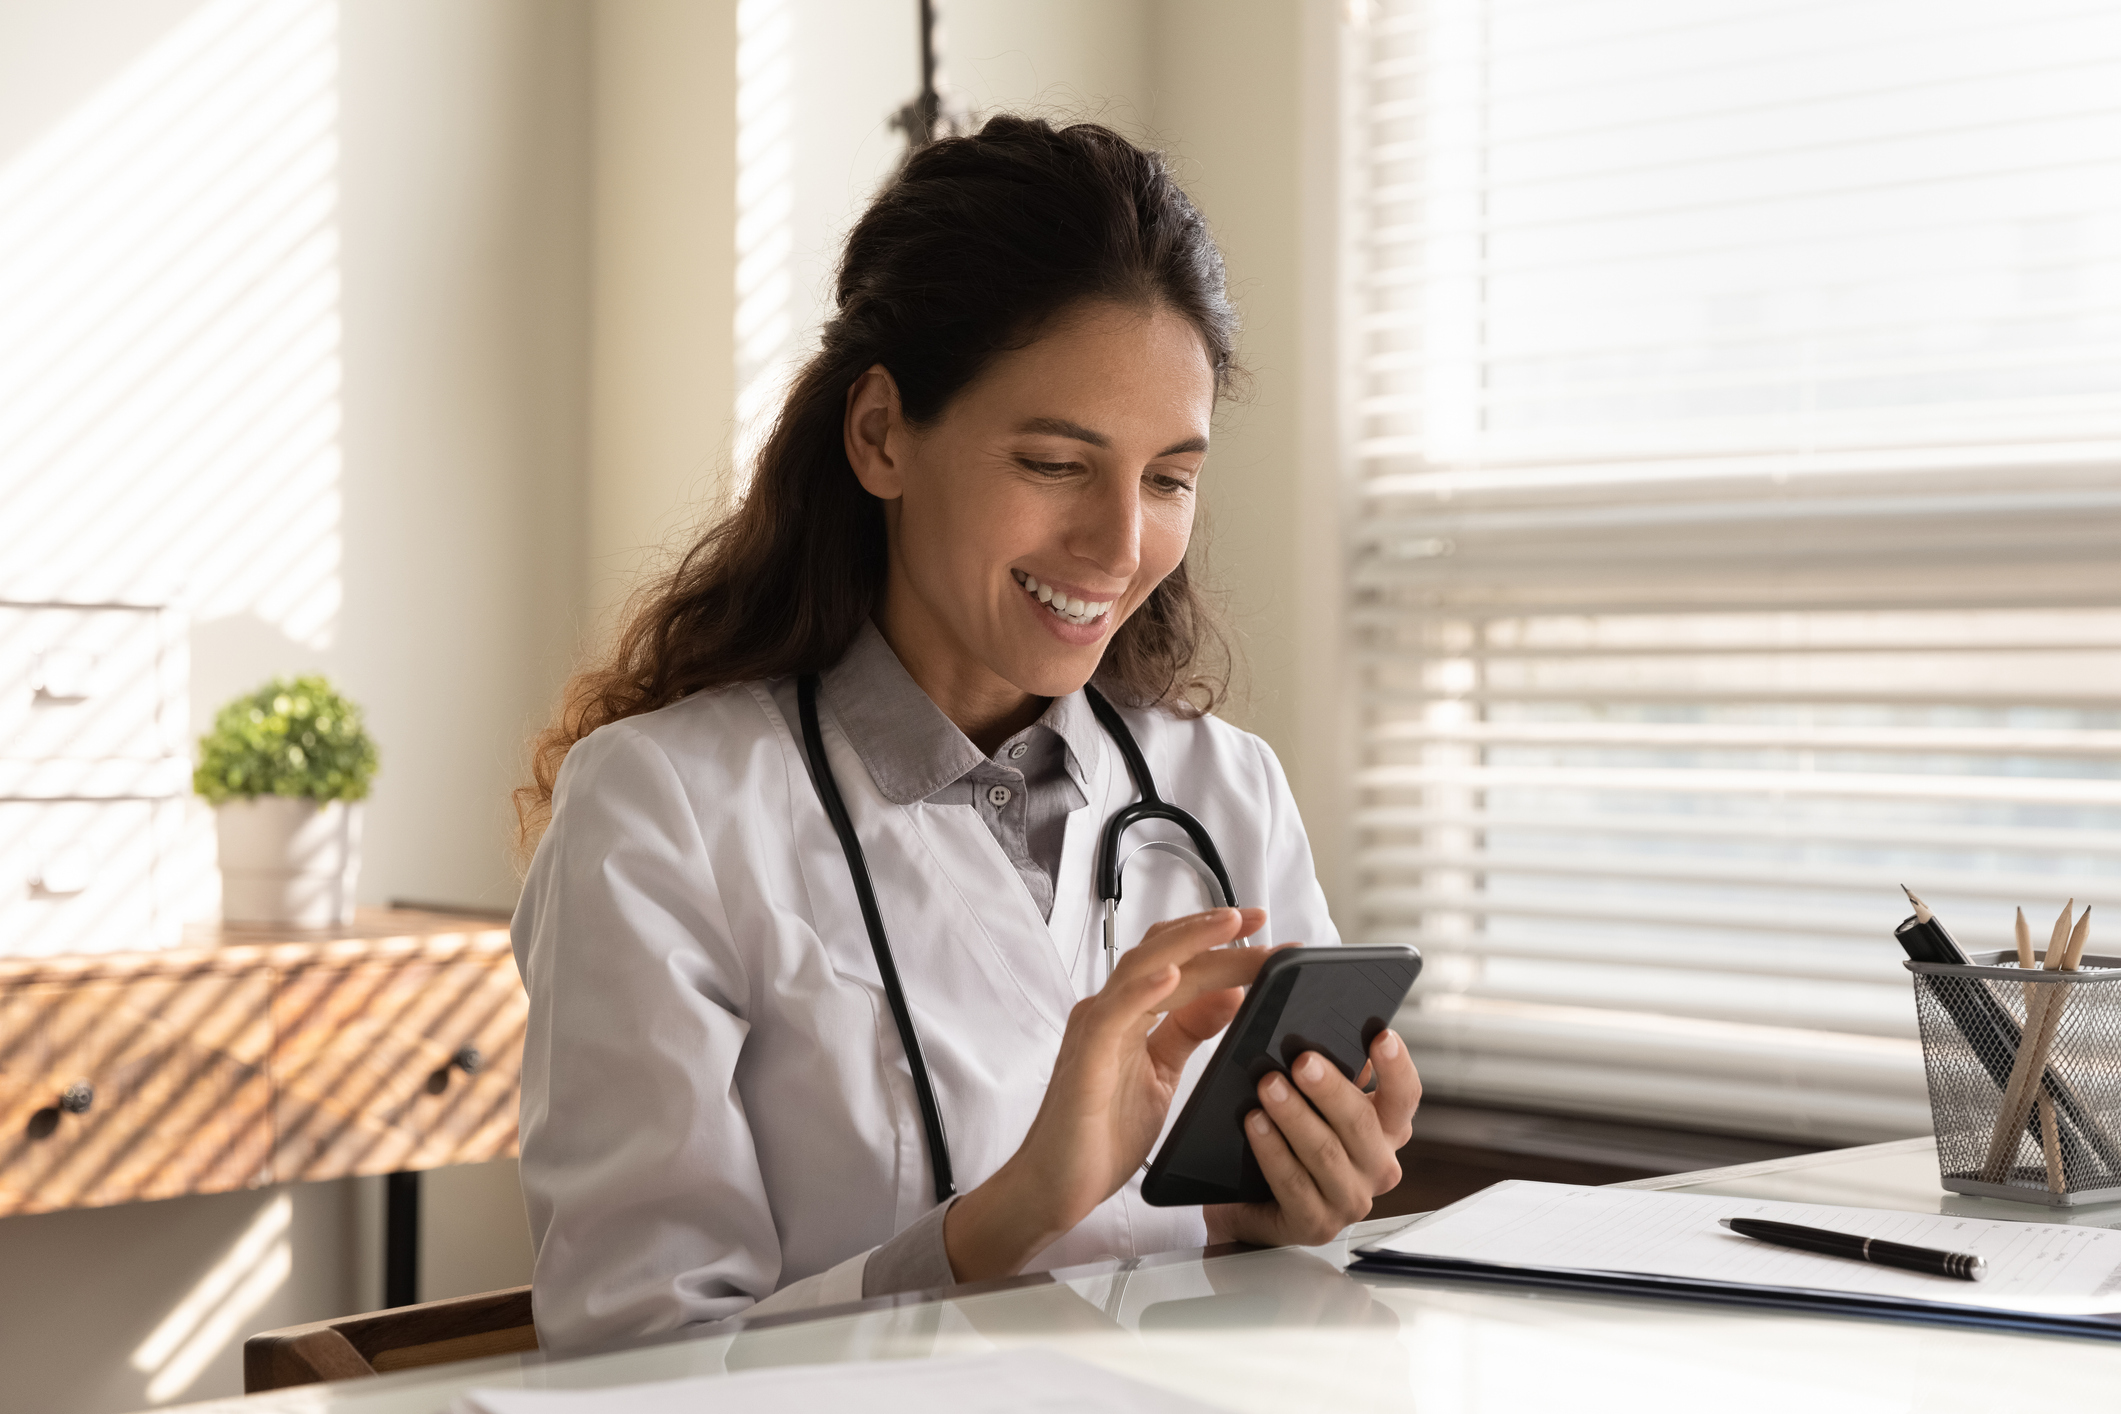 Young female doctor wearing a white lab coat and stethoscope sits at her office desk and smiles while checking her smartphone.